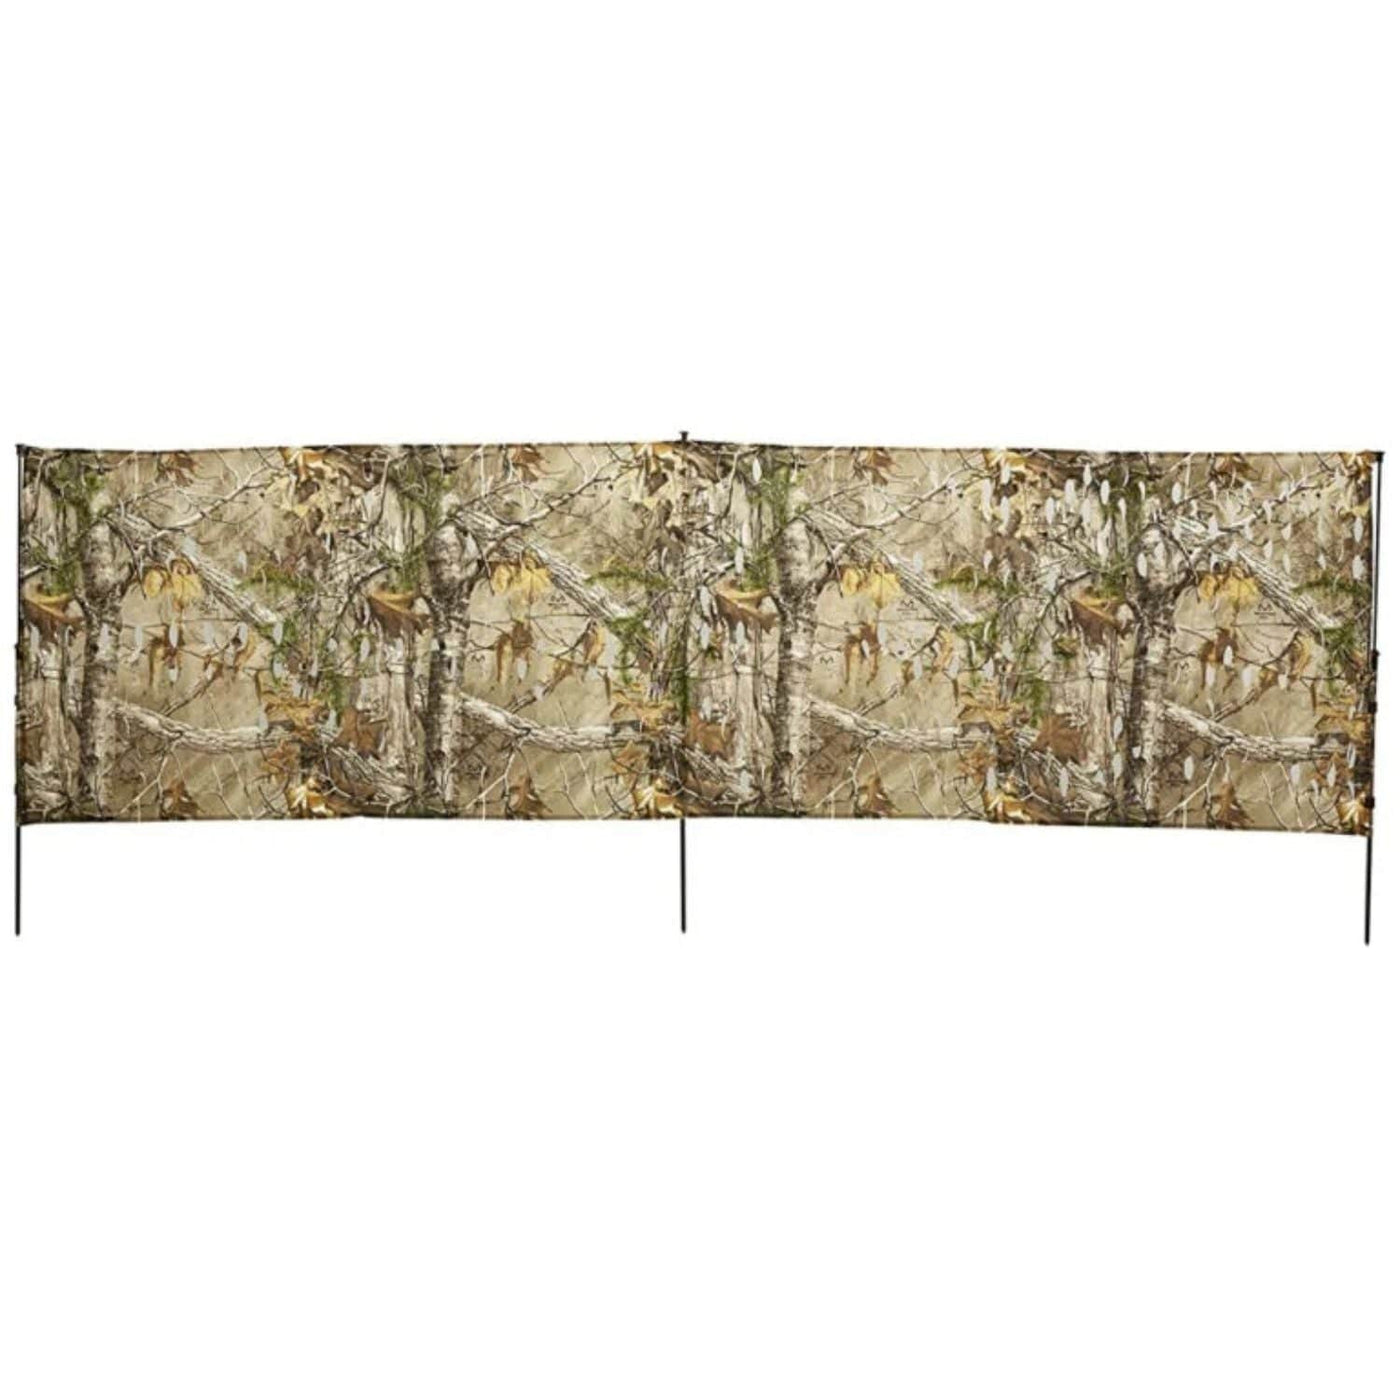 Hunters Specialties Hunters Specialties Ground Blind 27 in x ft Realtree Edge Hunting